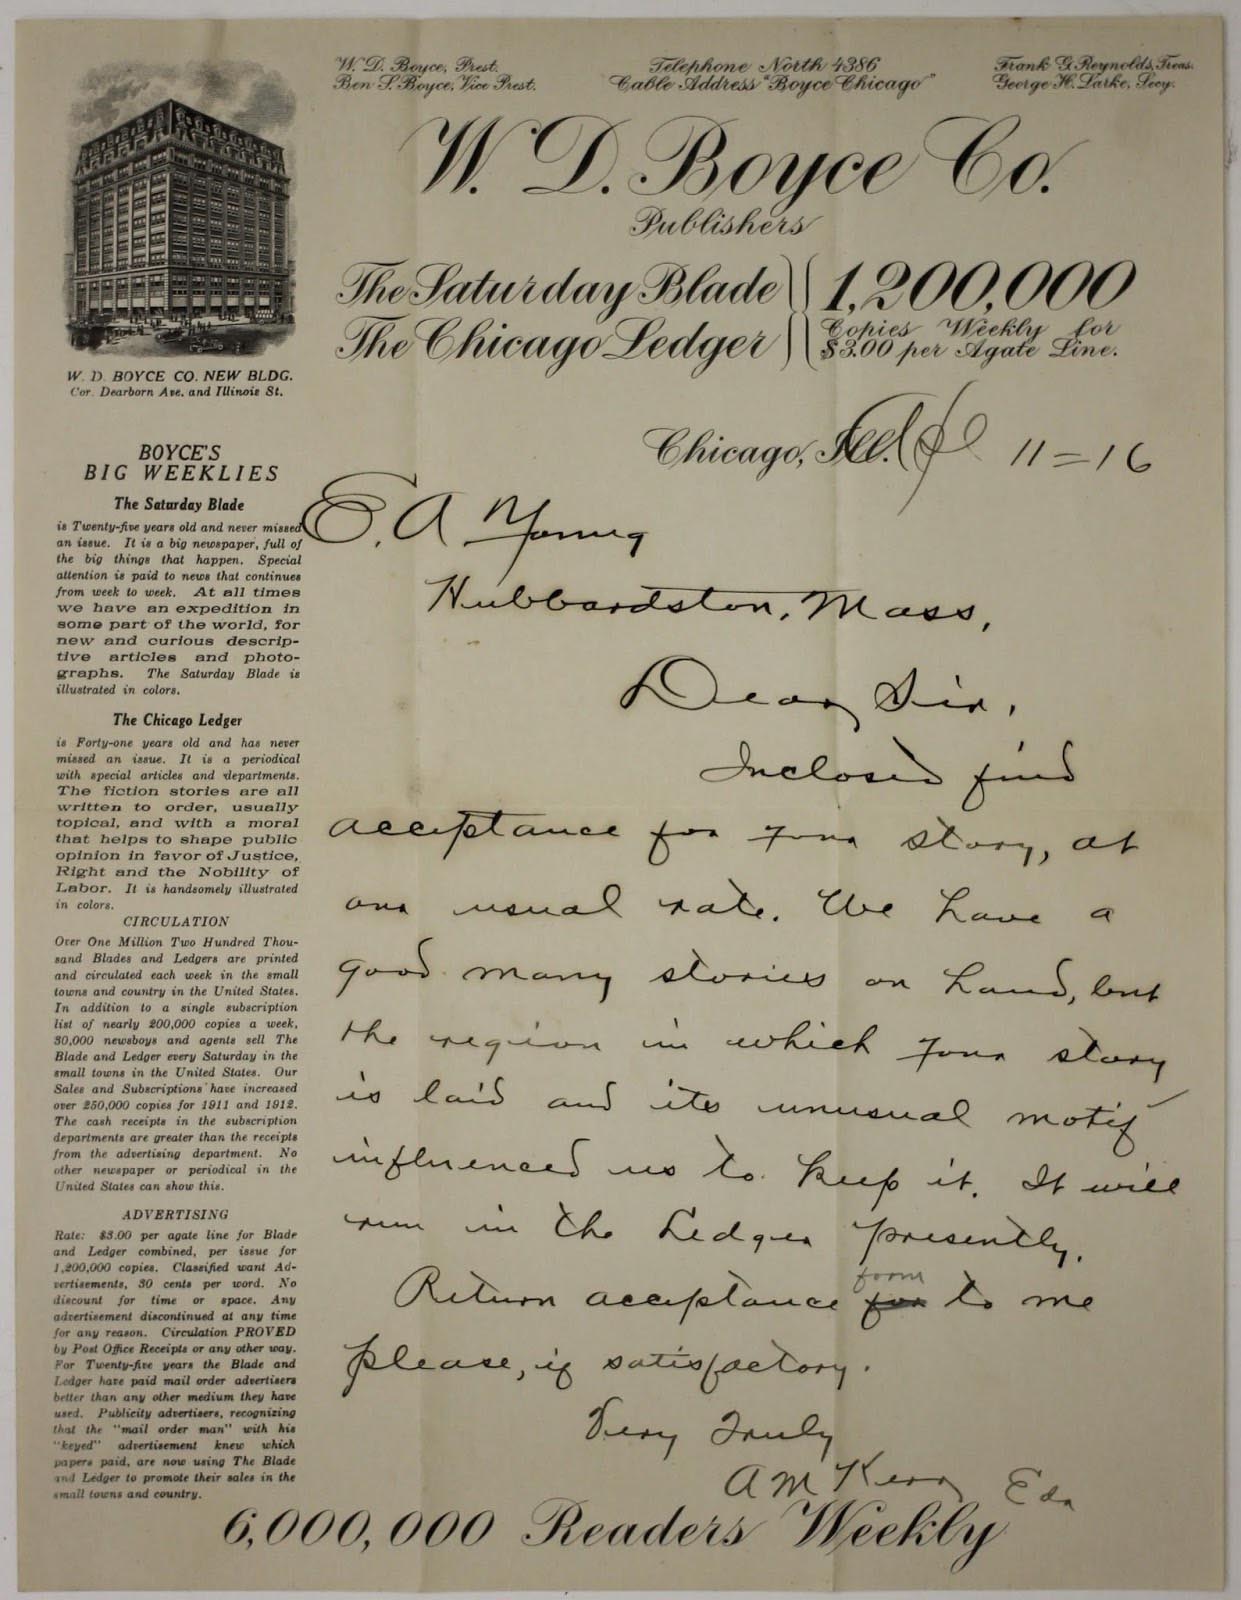 Handwritten correspondence between Ernest Young and a publisher, on the WD Boyce letterhead. There is an engraving of the building on the upper left, and a tagline at the bottom: "6,000,000 Readers Weekly. bo.